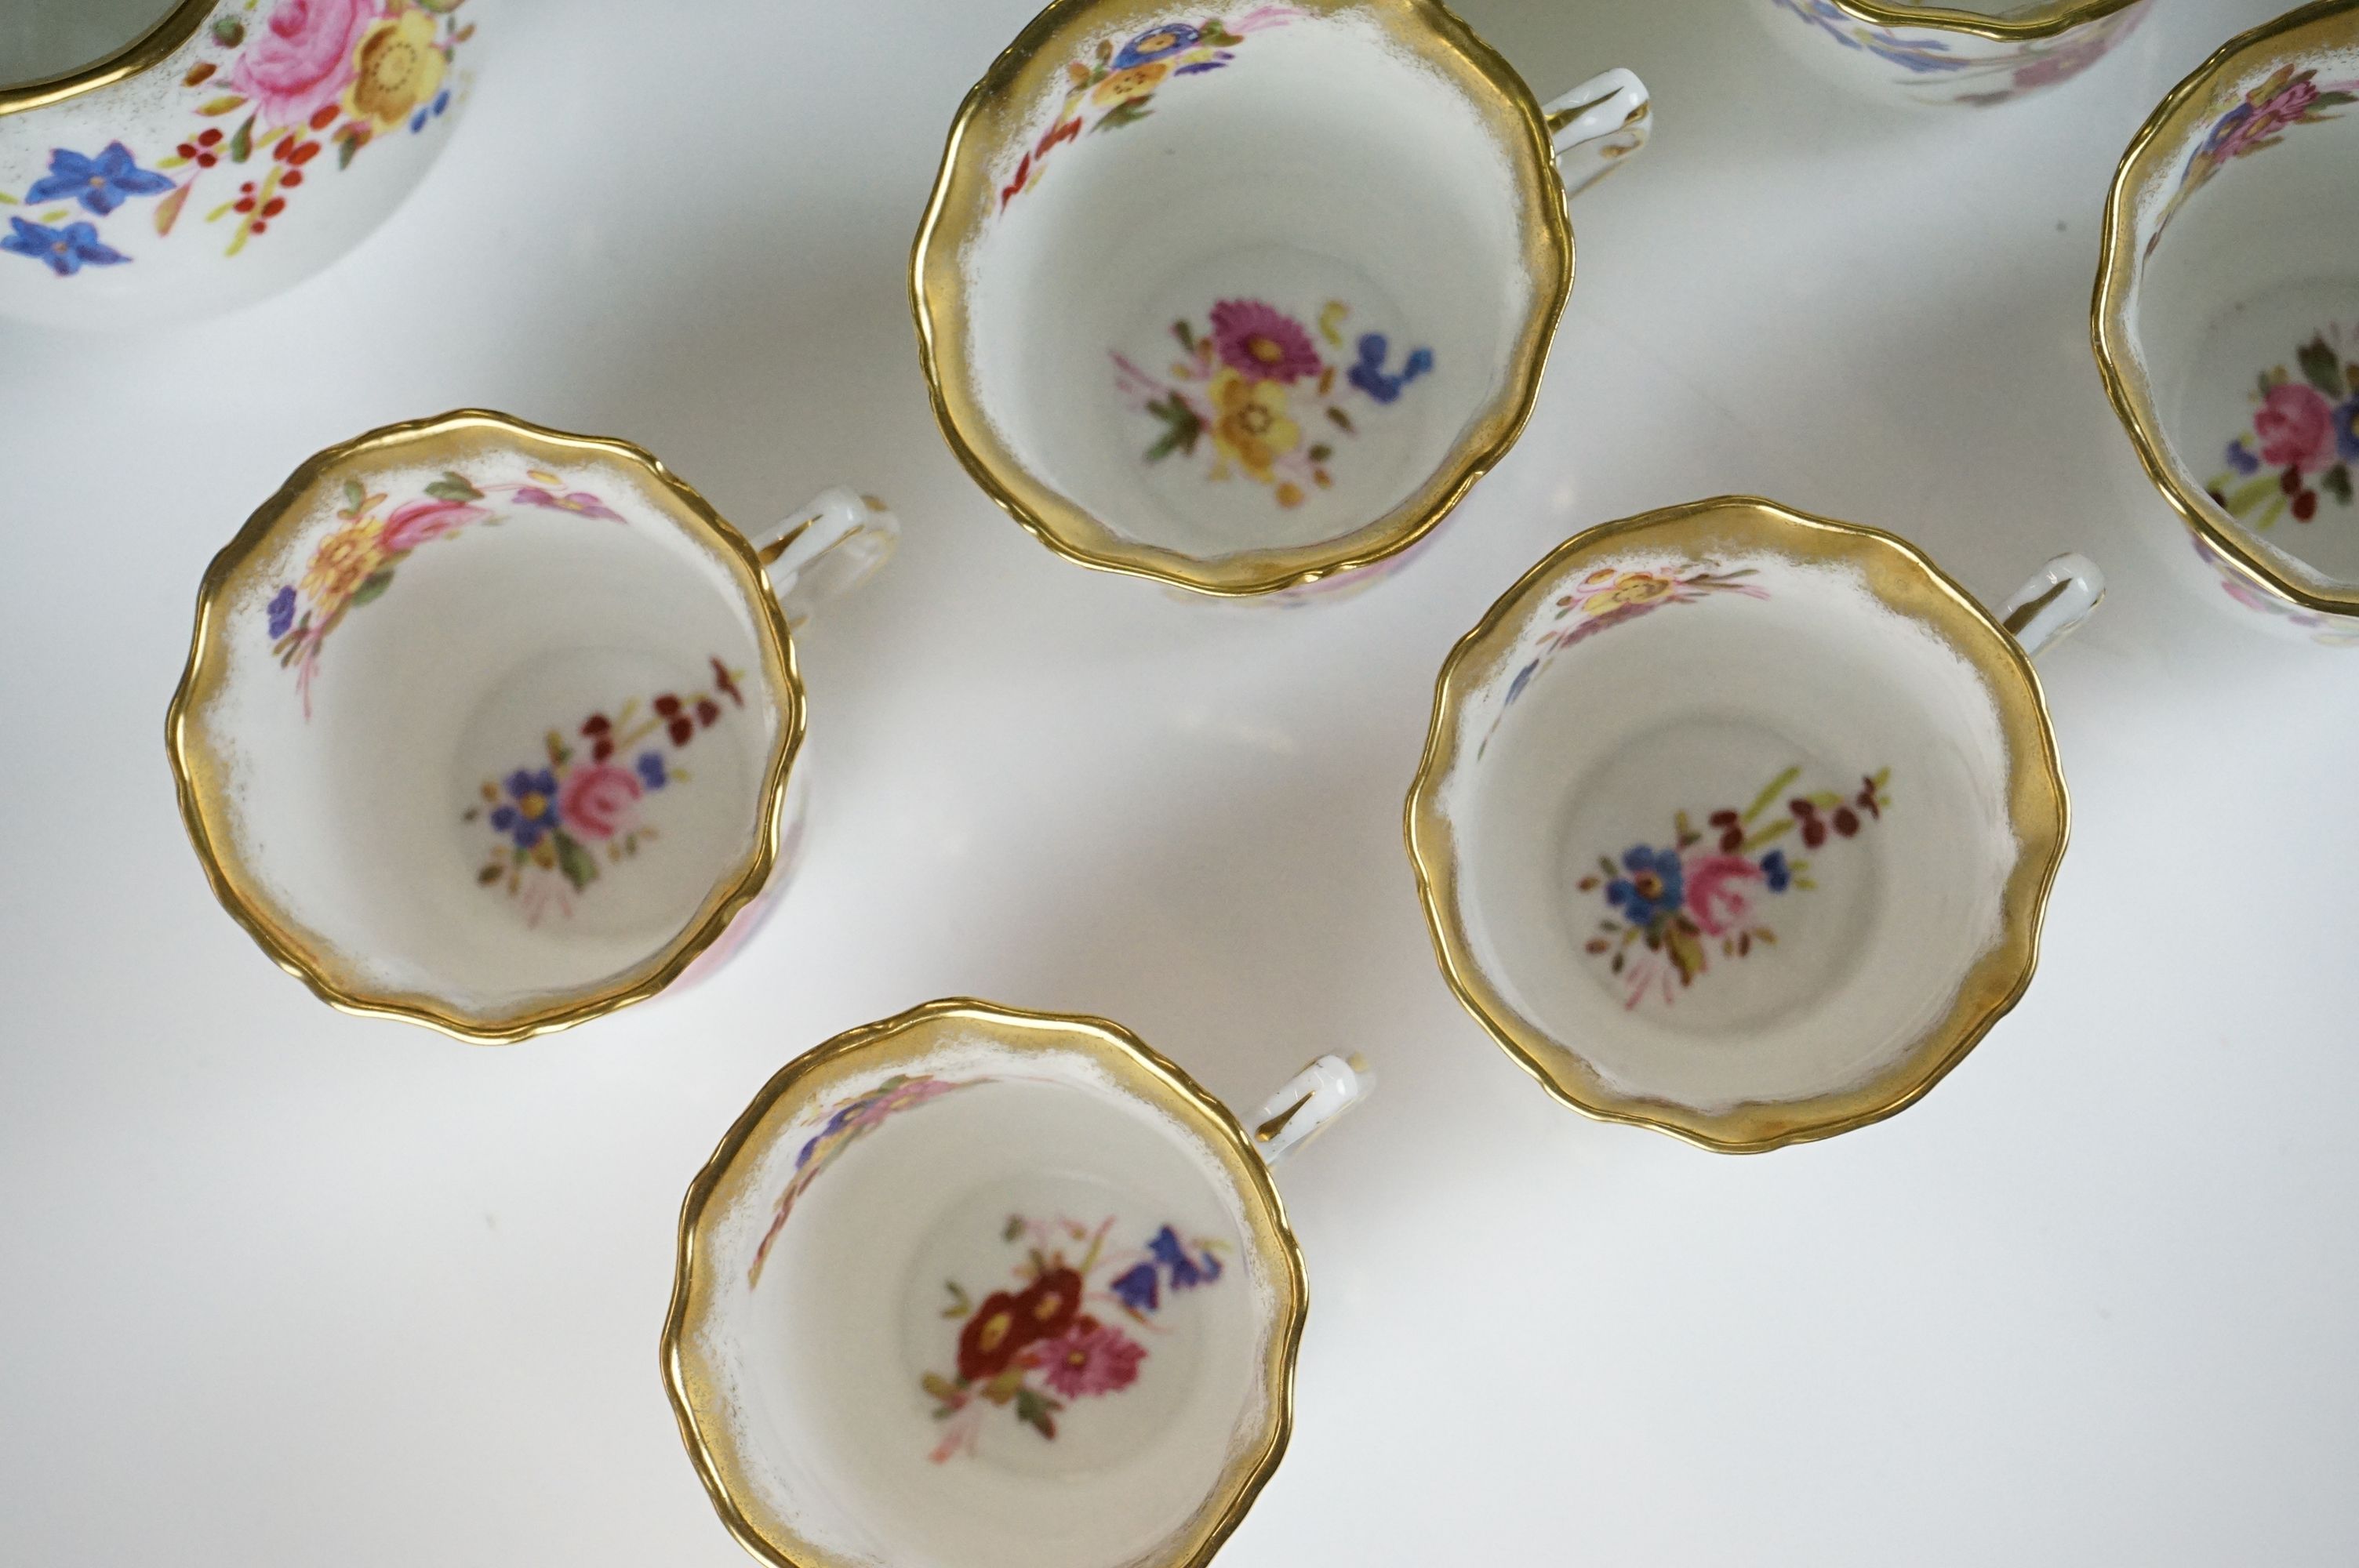 Hammersley & Co 'Dresden Sprays' pattern tea set, pattern no. 12668, comprising teapot & cover, 8 - Image 3 of 9